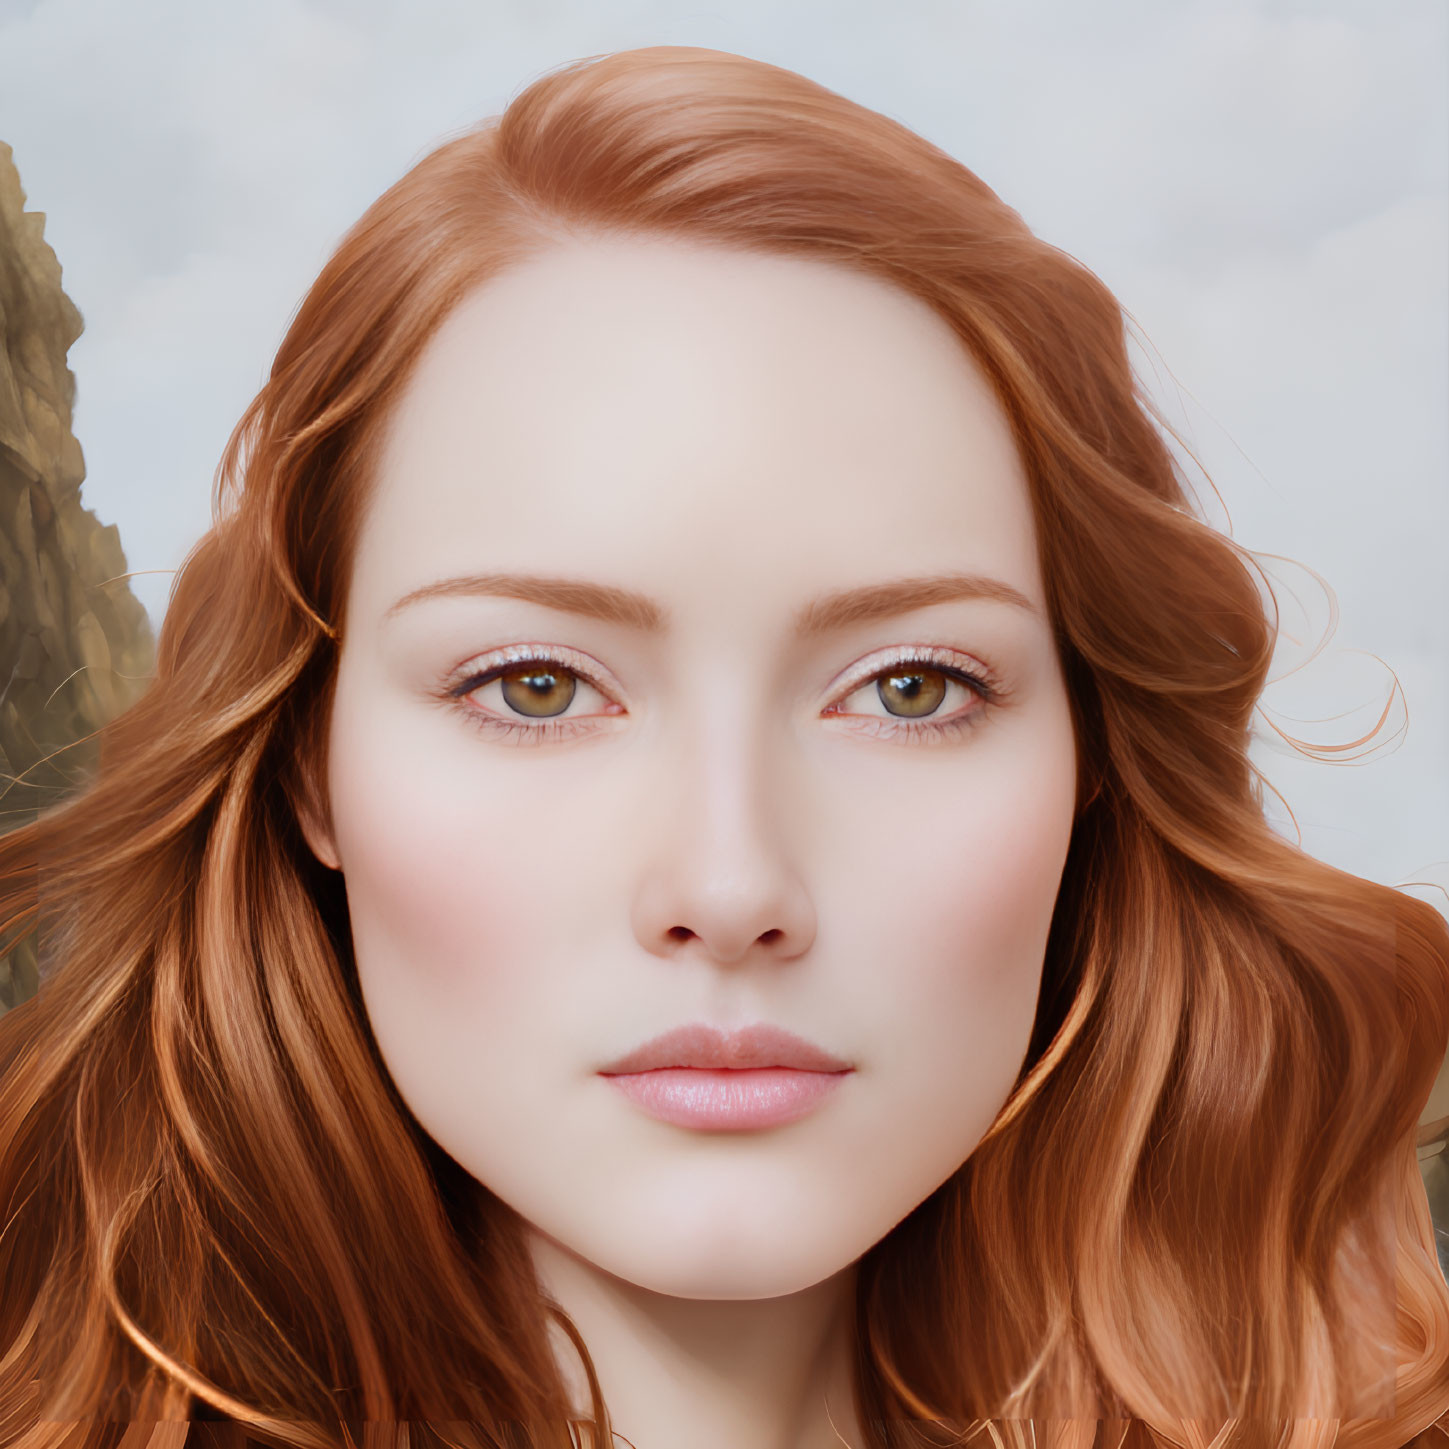 Close-up portrait of a woman with auburn hair and brown eyes on rocky backdrop